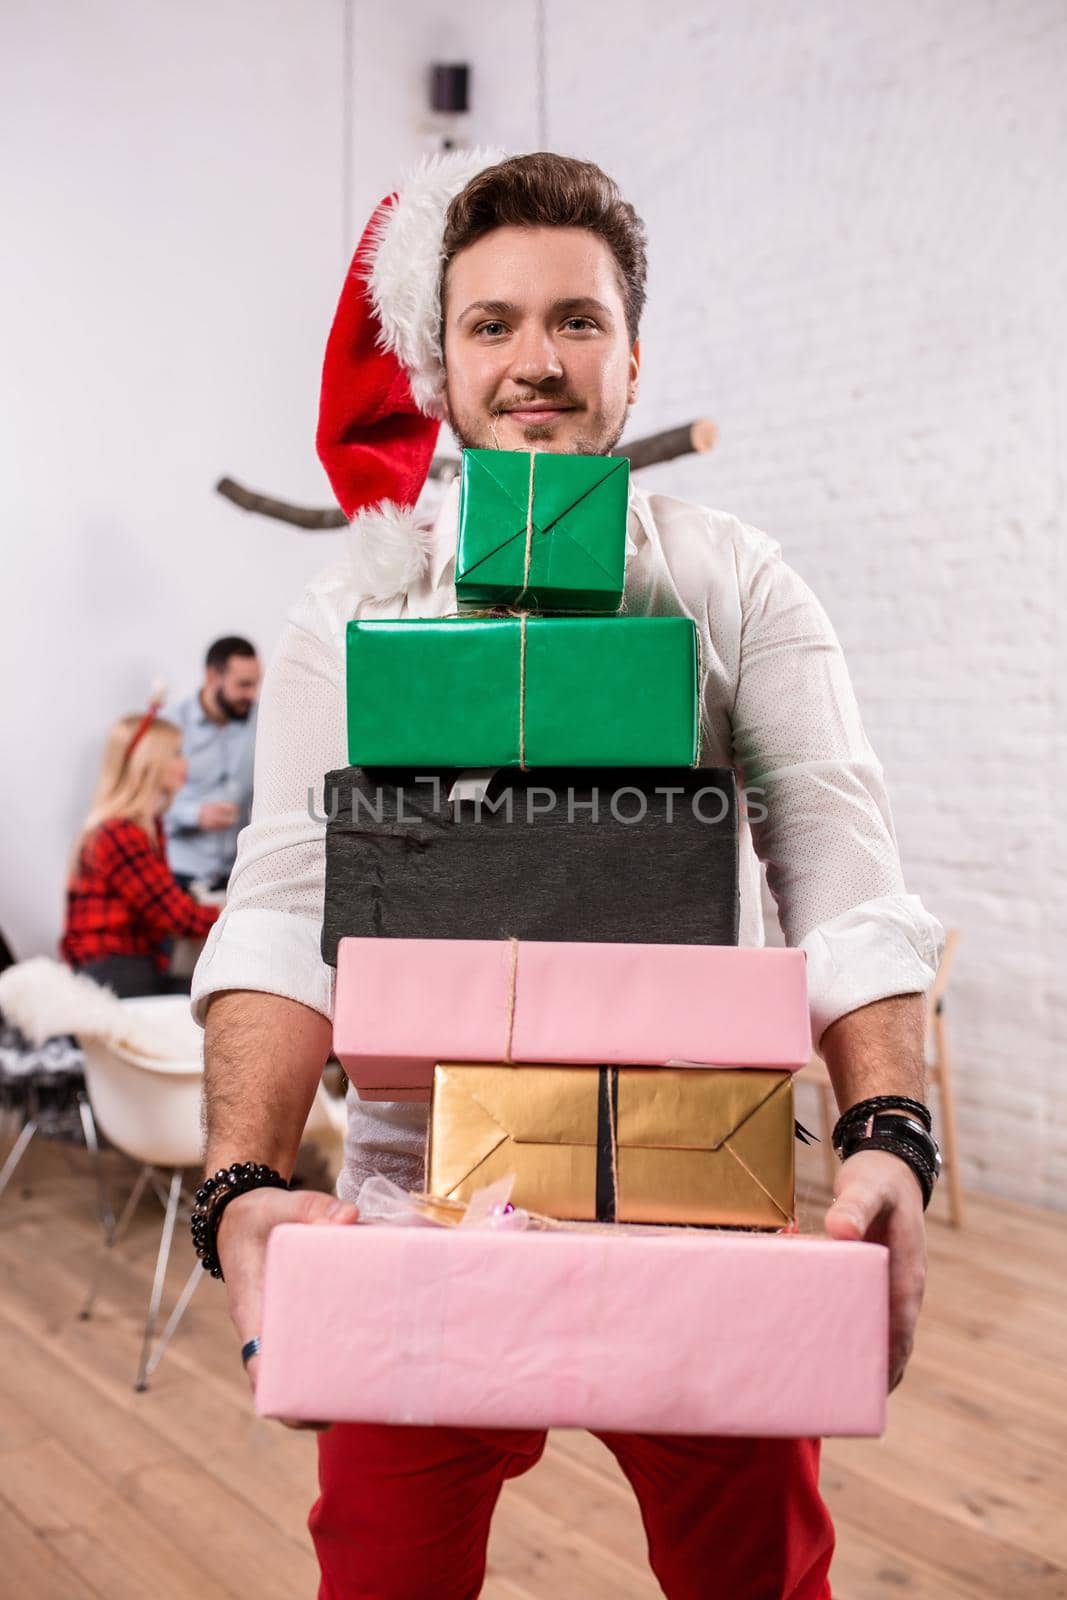 Shot of happy friends enjoying holidays. Focus on the man in the foreground in a red Christmas hat. A man with a gift boxes in his hands in a white room